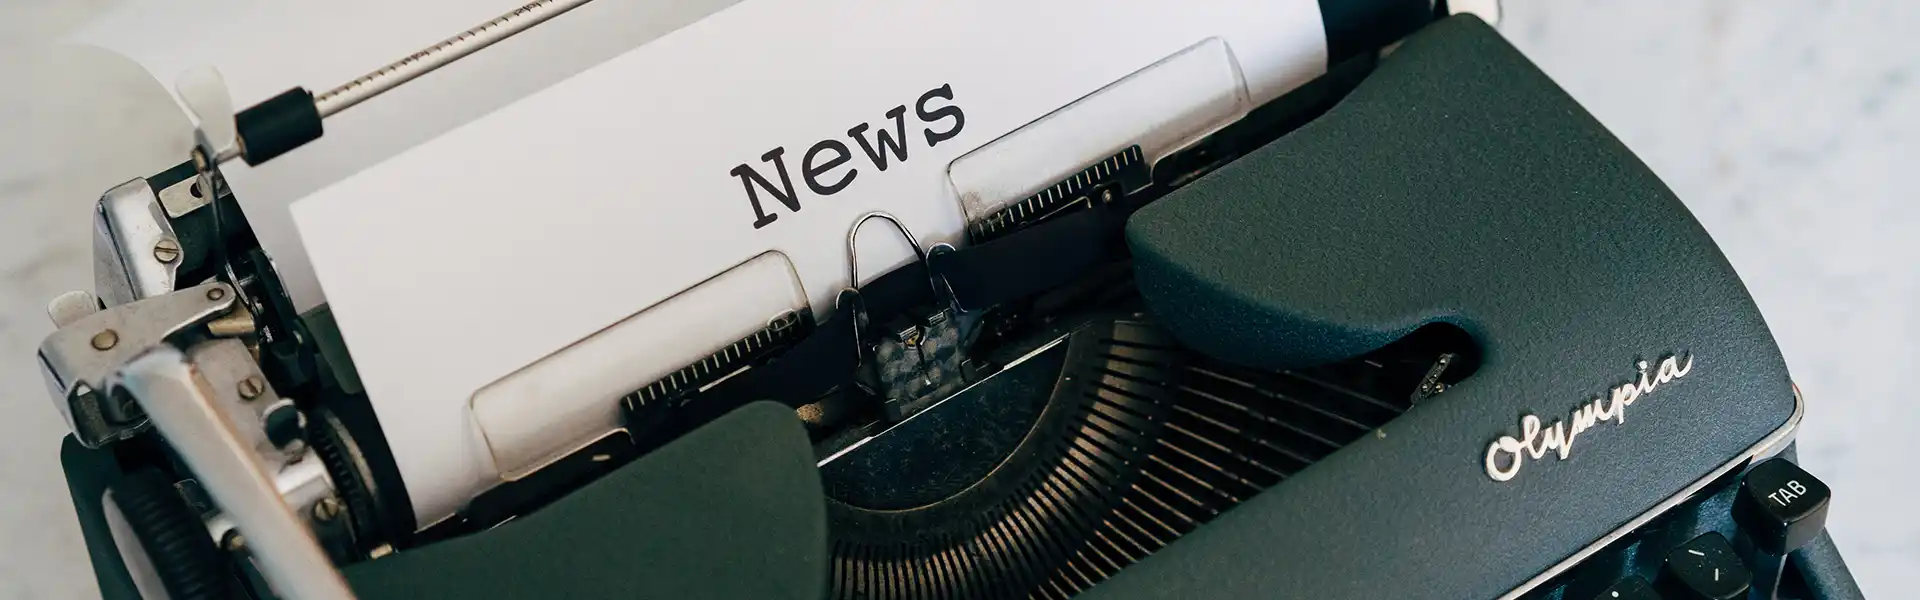 Close-up of an old manual typewriter with a sheet of paper coming out the top which reads News